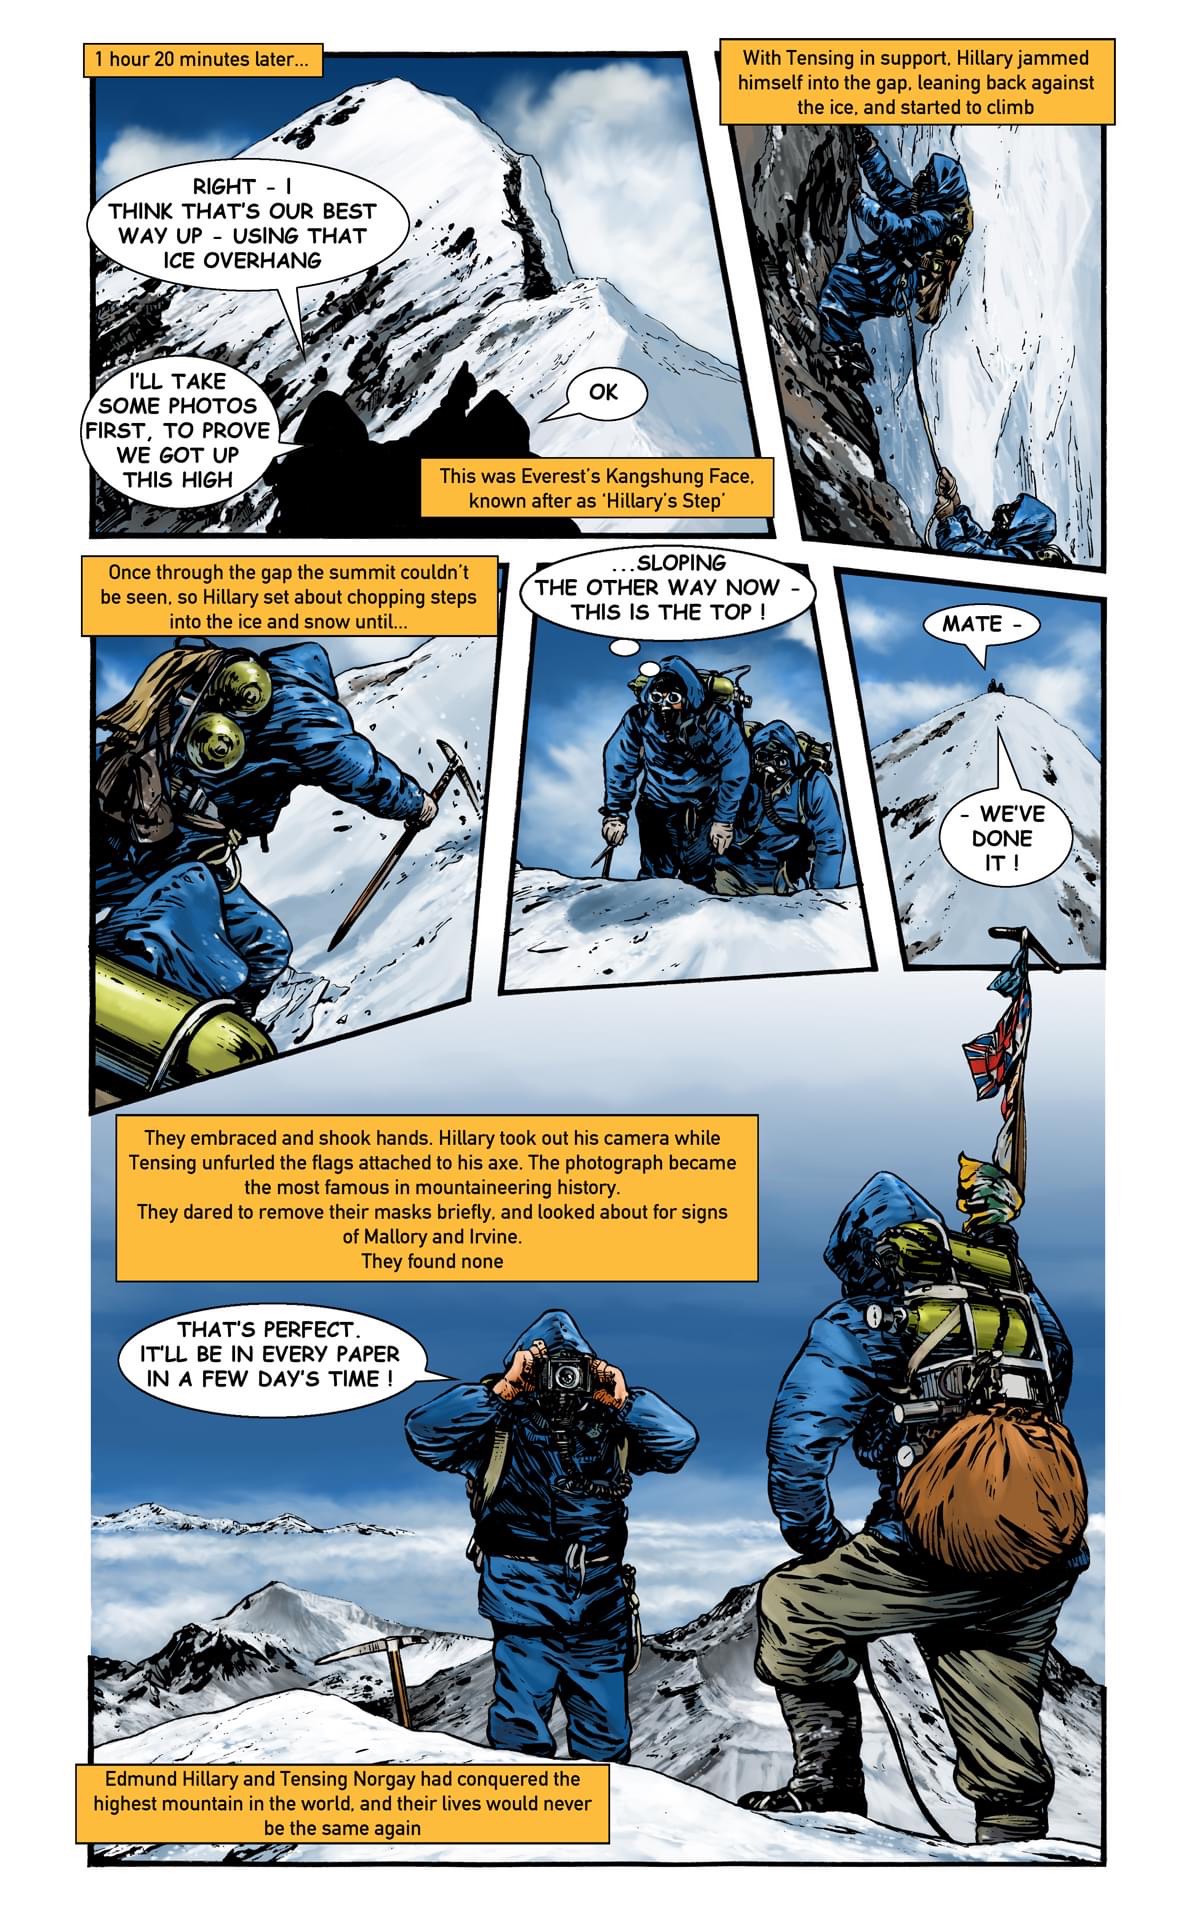 A page from "The Conquest of Everest", written and drawn by Nick Spender